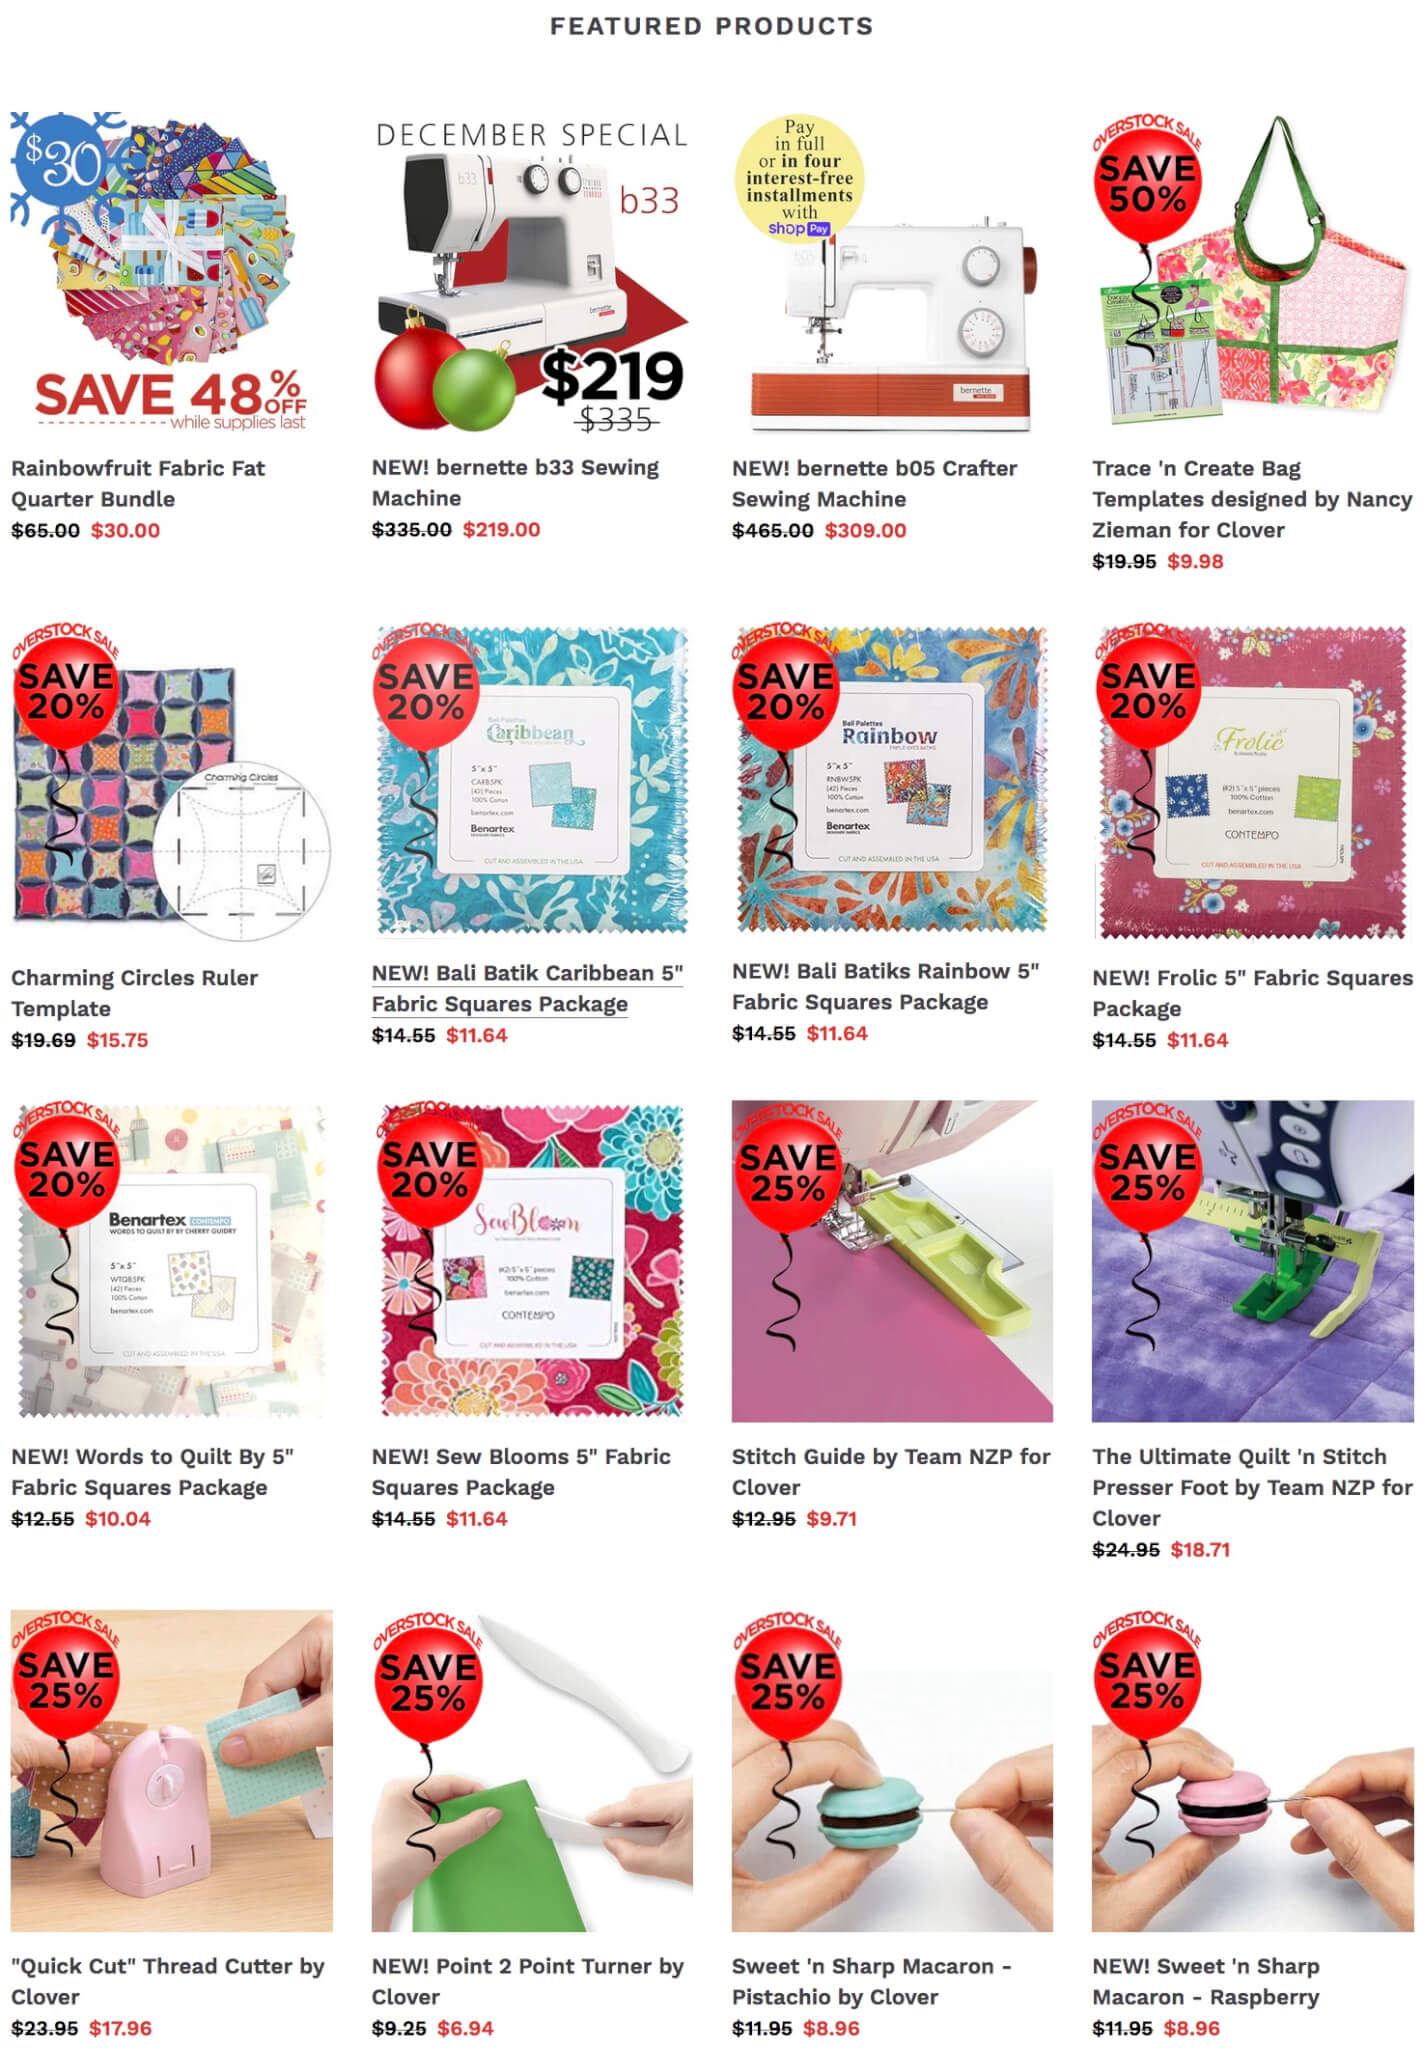 Nancy Zieman Productions Semi-Annual Clearance and Stock Up SALE at ShopNZP.com